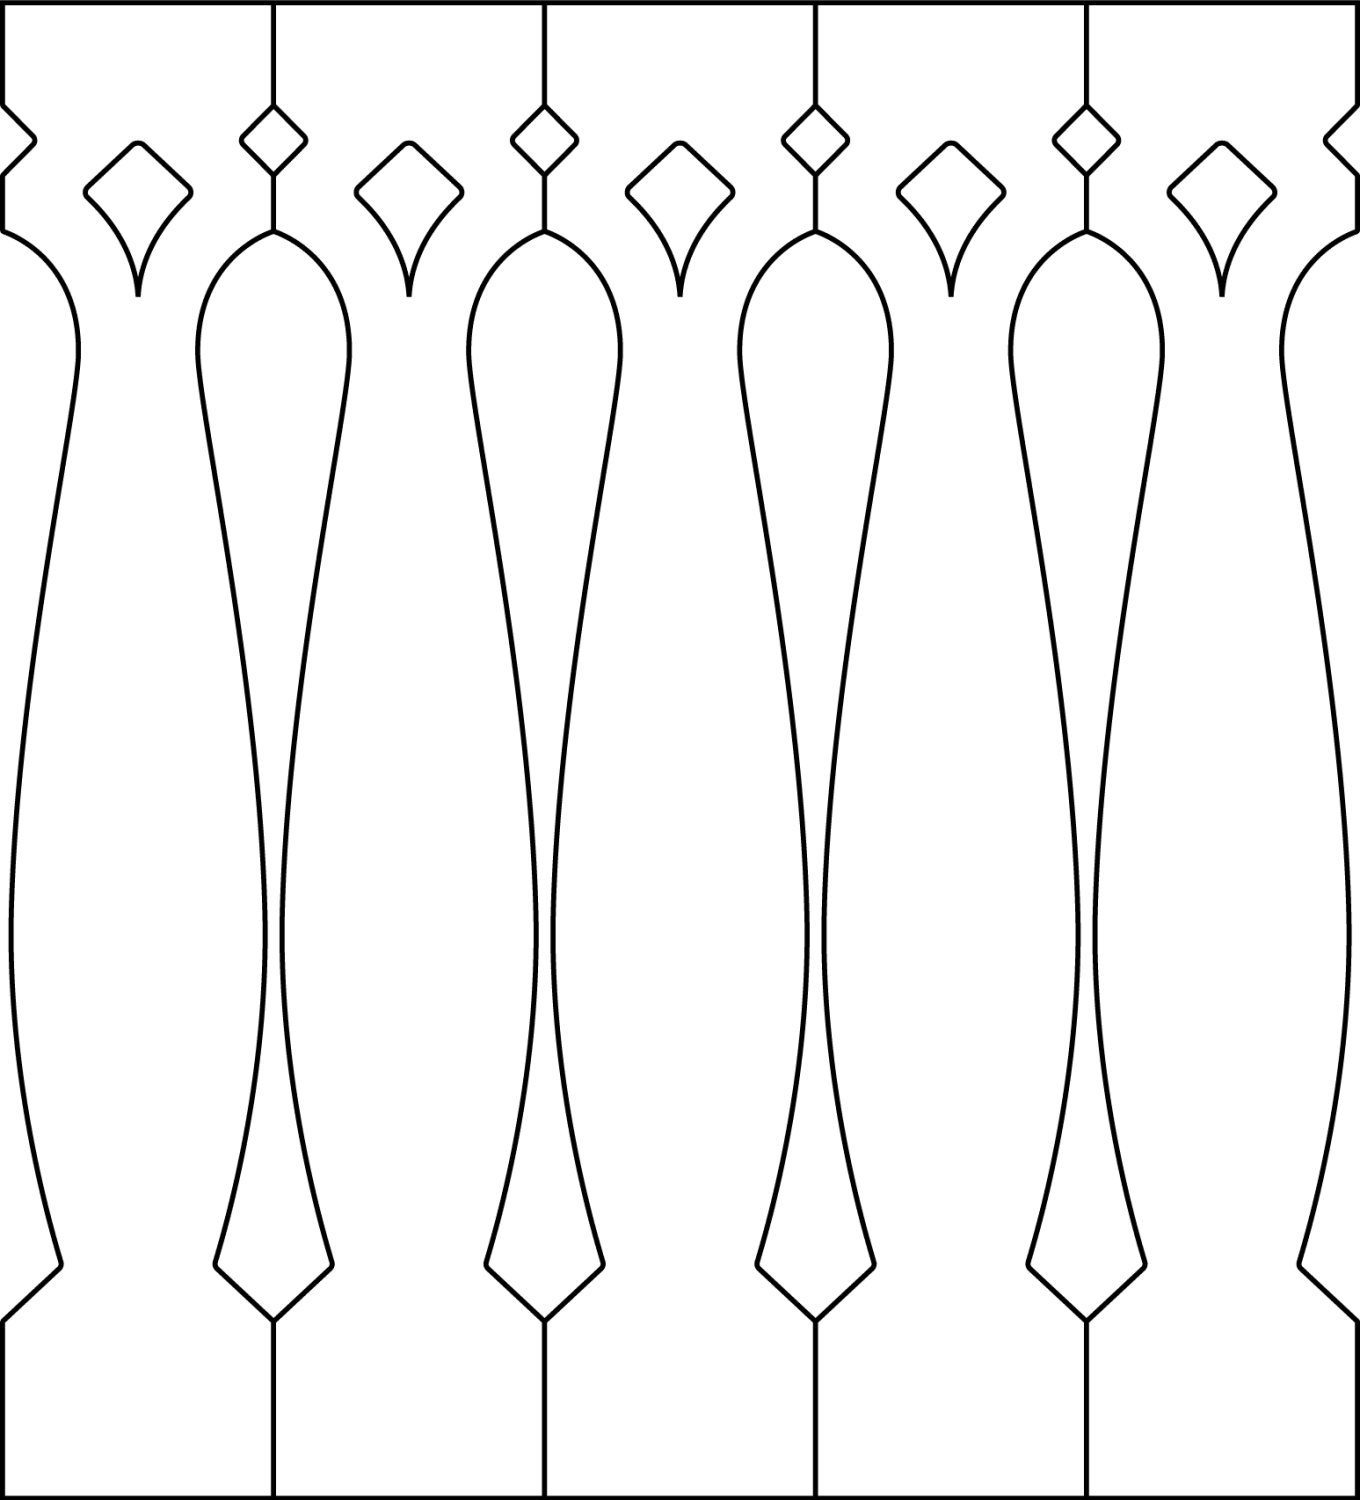 Baluster 013 - The drawing shows 5 Decorative victorian sawn balusters & pickets together